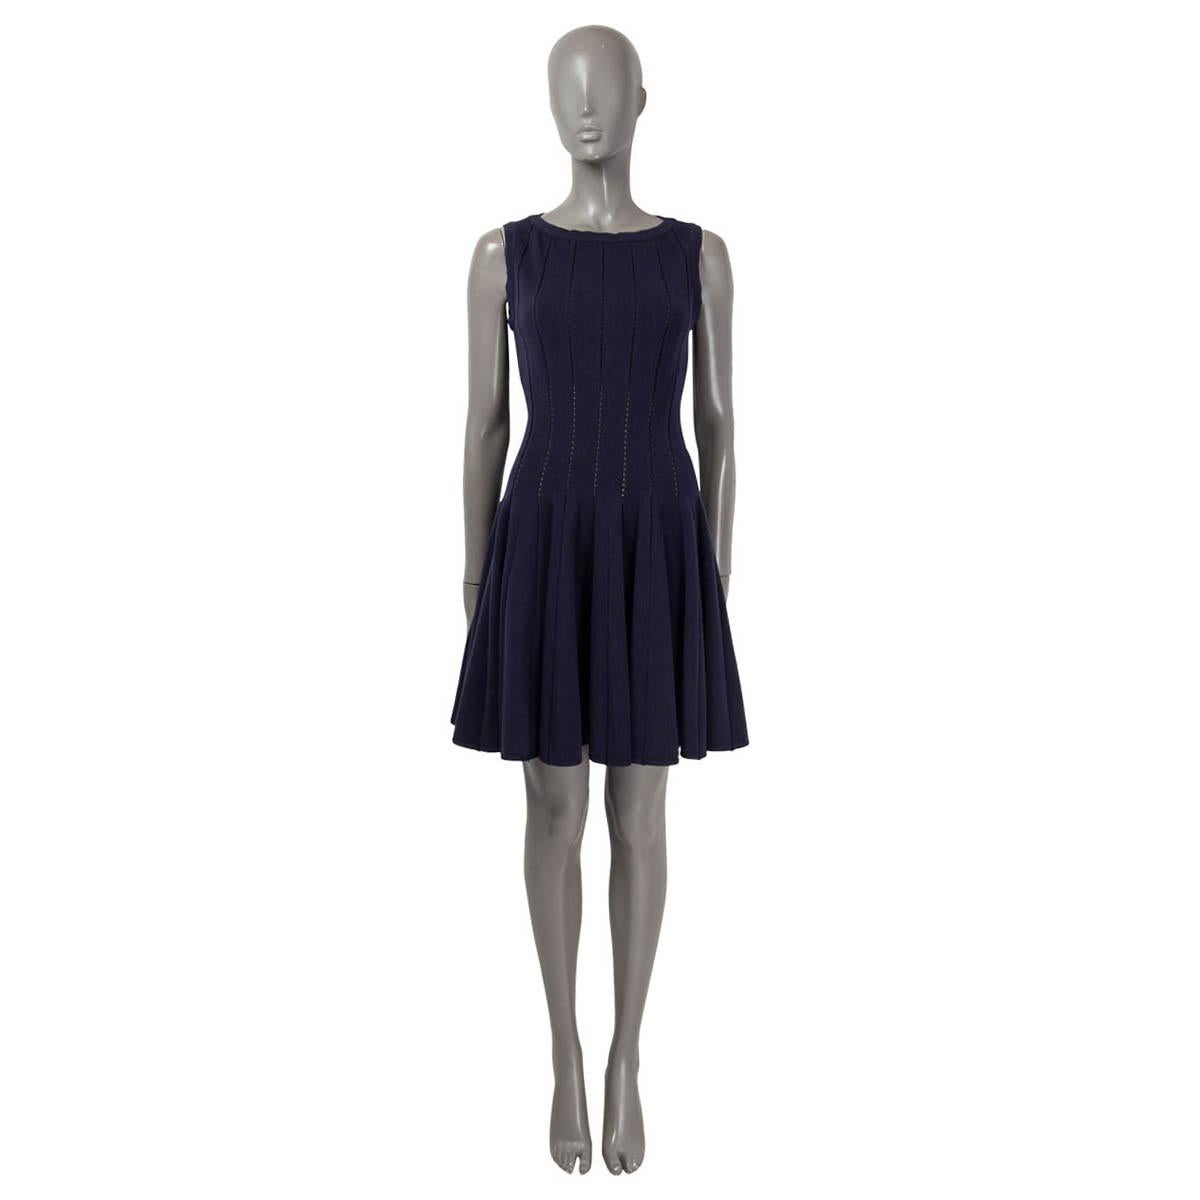 100% authentic Alaïa sleeveless flared dress in navy blue knitted wool (80%), cotton (5%) and polyamide (5%). Opens with a zipper on the back. Has been worn and is in excellent condition. 

Measurements
Tag Size	40
Size	M
Shoulder Width	34cm